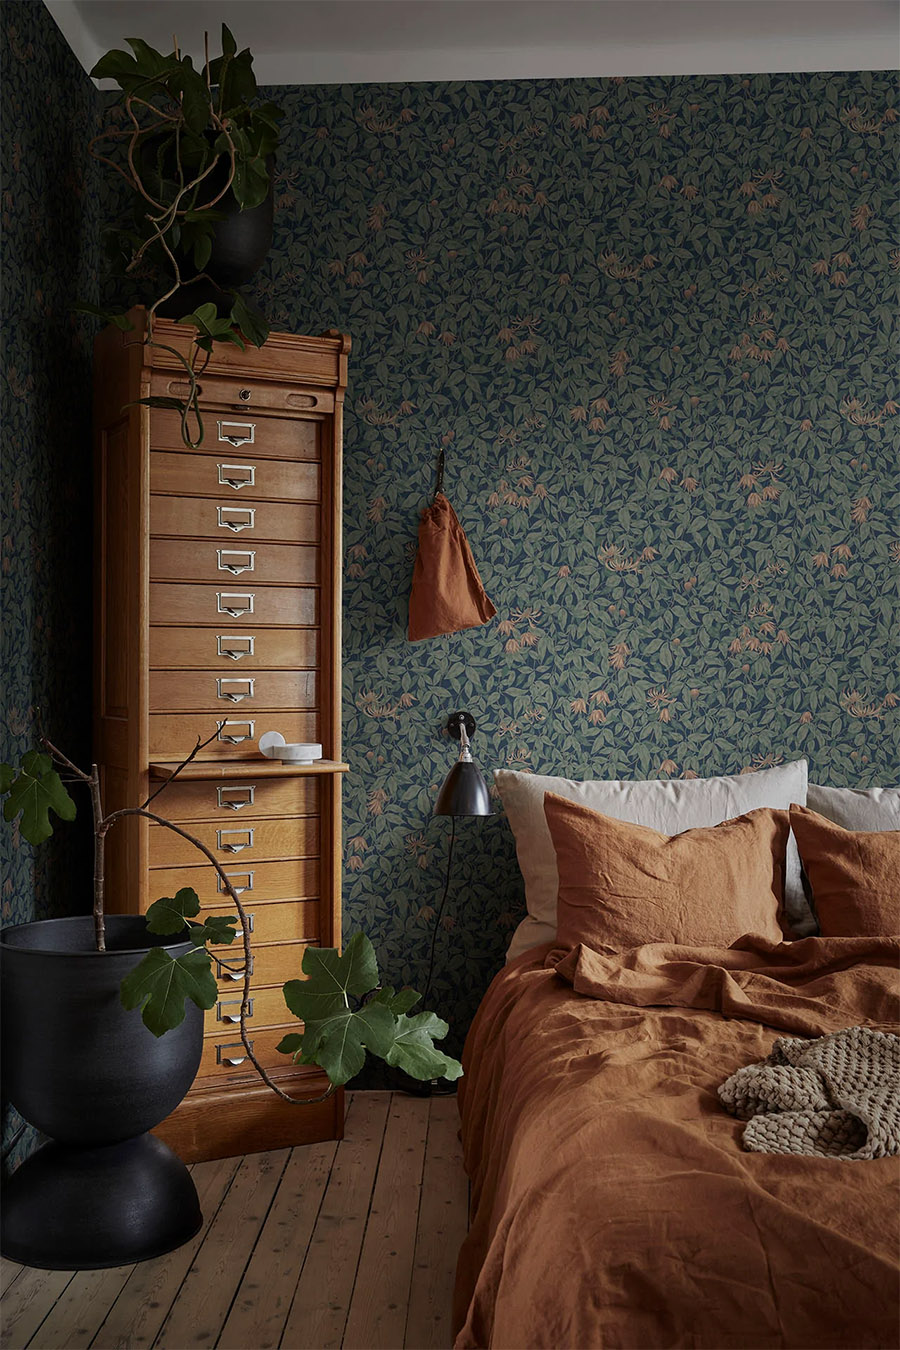 green floral wallpaper in bedroom with mustard and wood accents